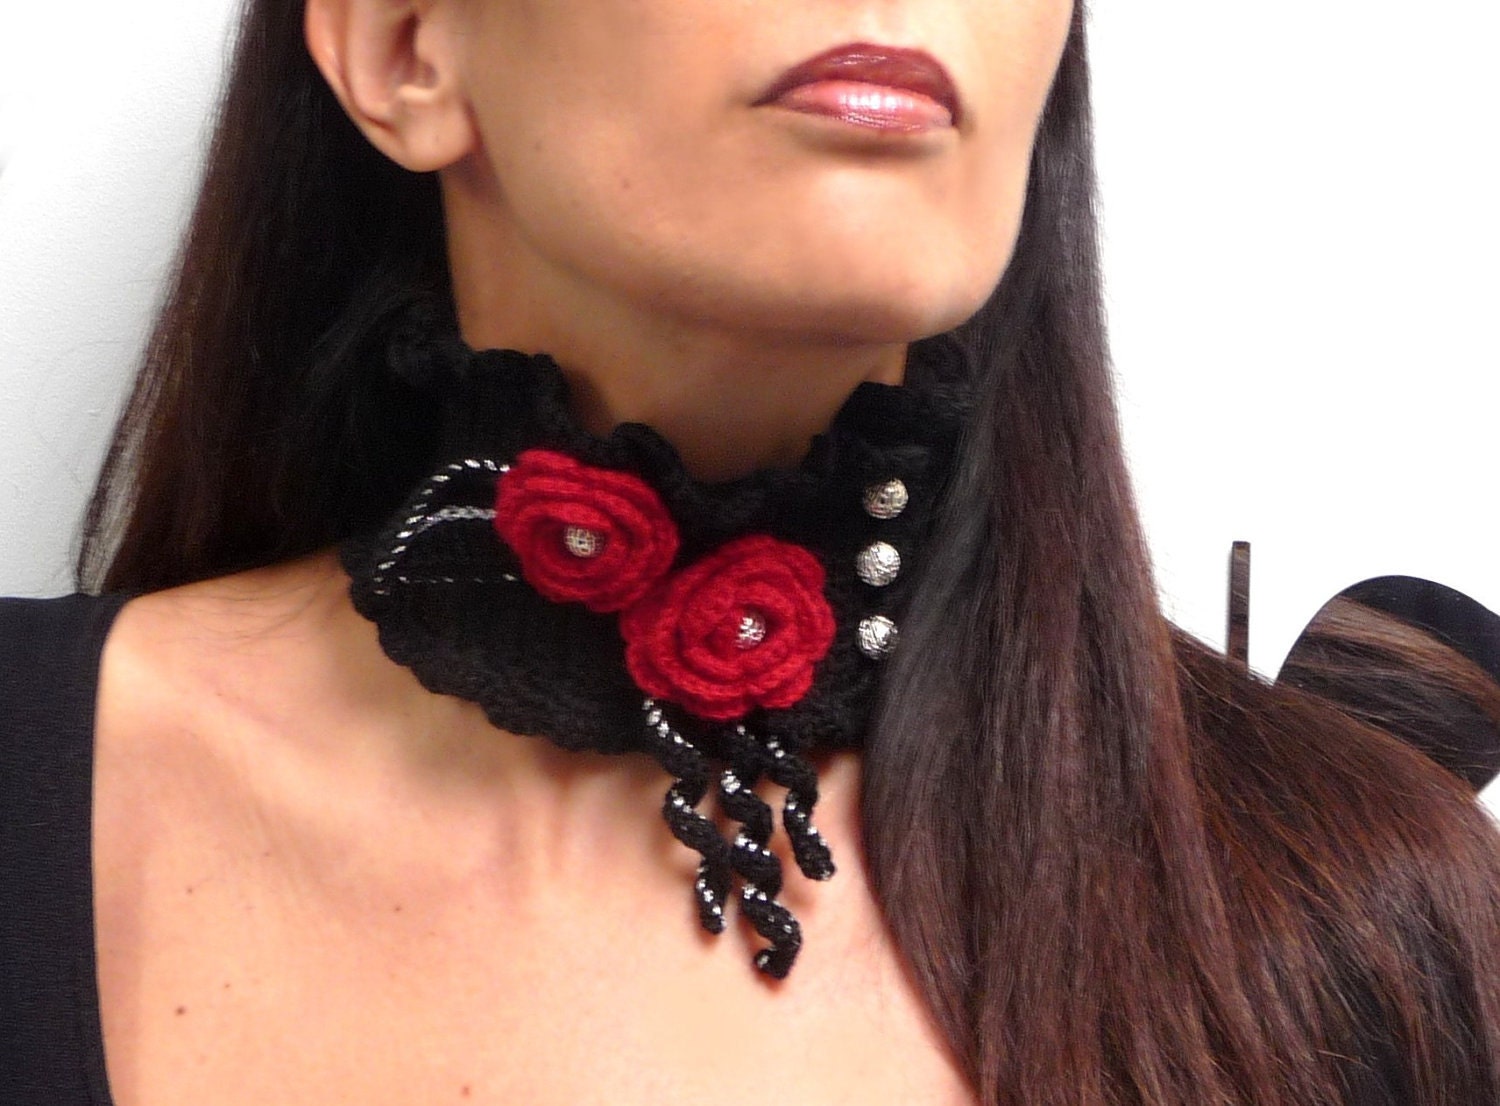 JUSTINE Lux Cowl Choker Accessories Scarves & Wraps Collars & Bibs Crochet Black Neckwarmer with Red Flowers and Silver Beads 